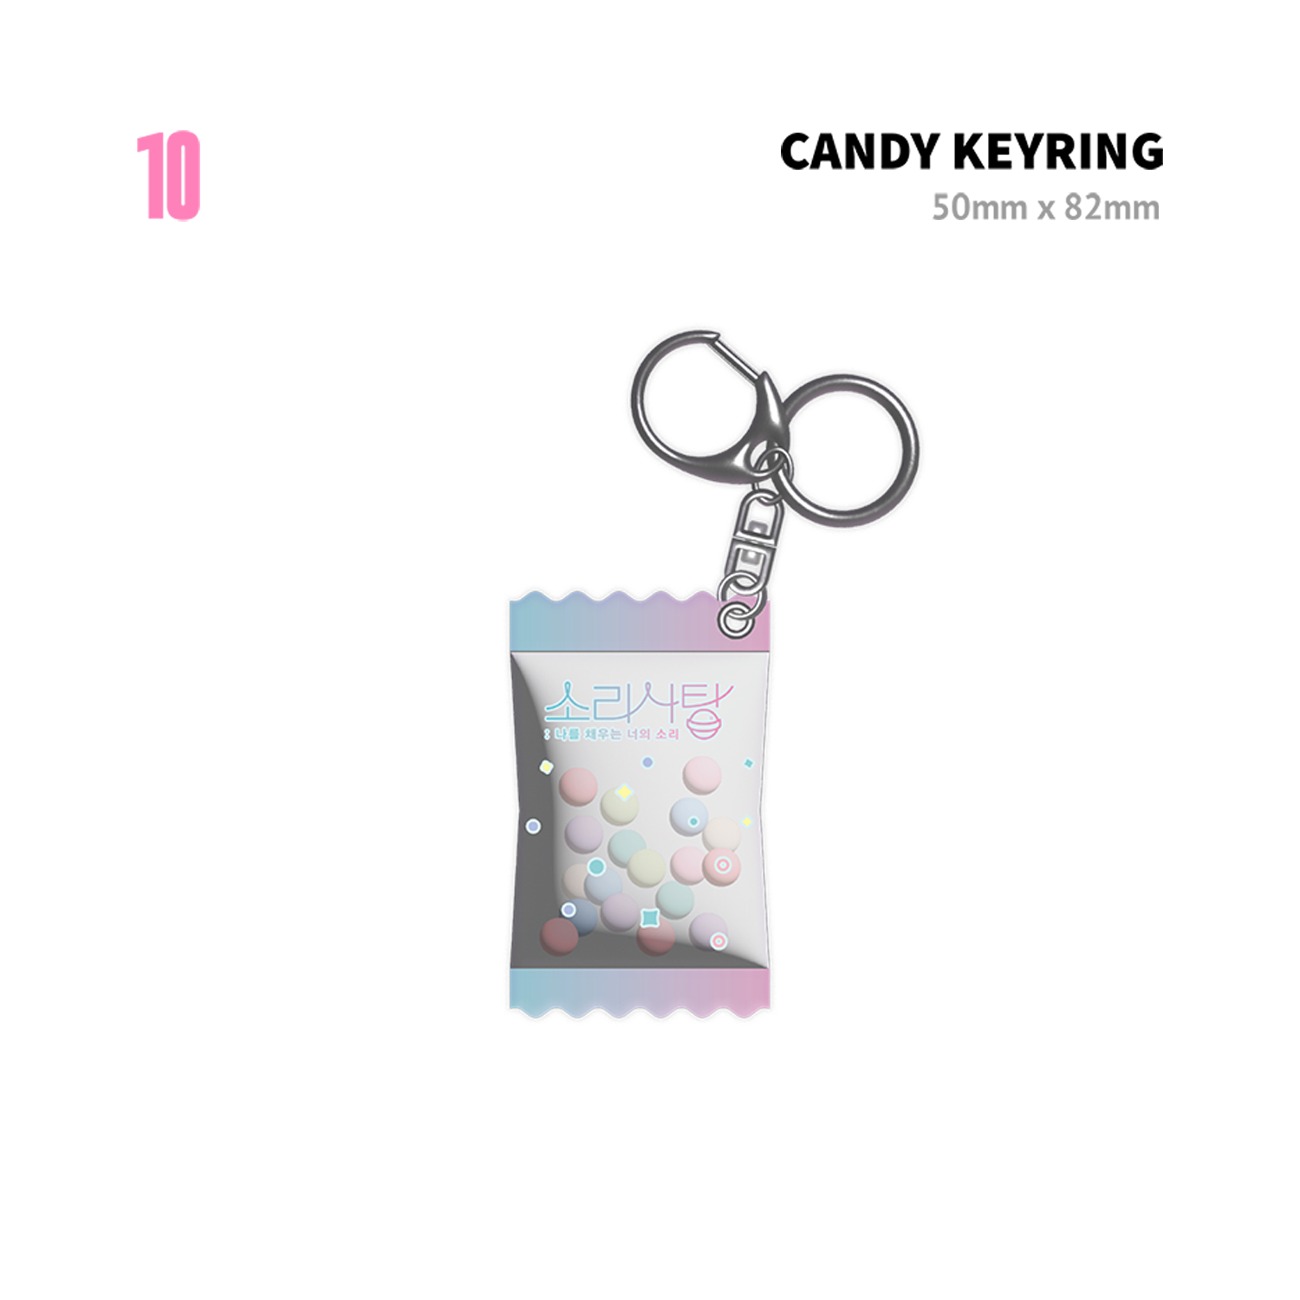 n.SSign - Sound Candy - official Kgoods